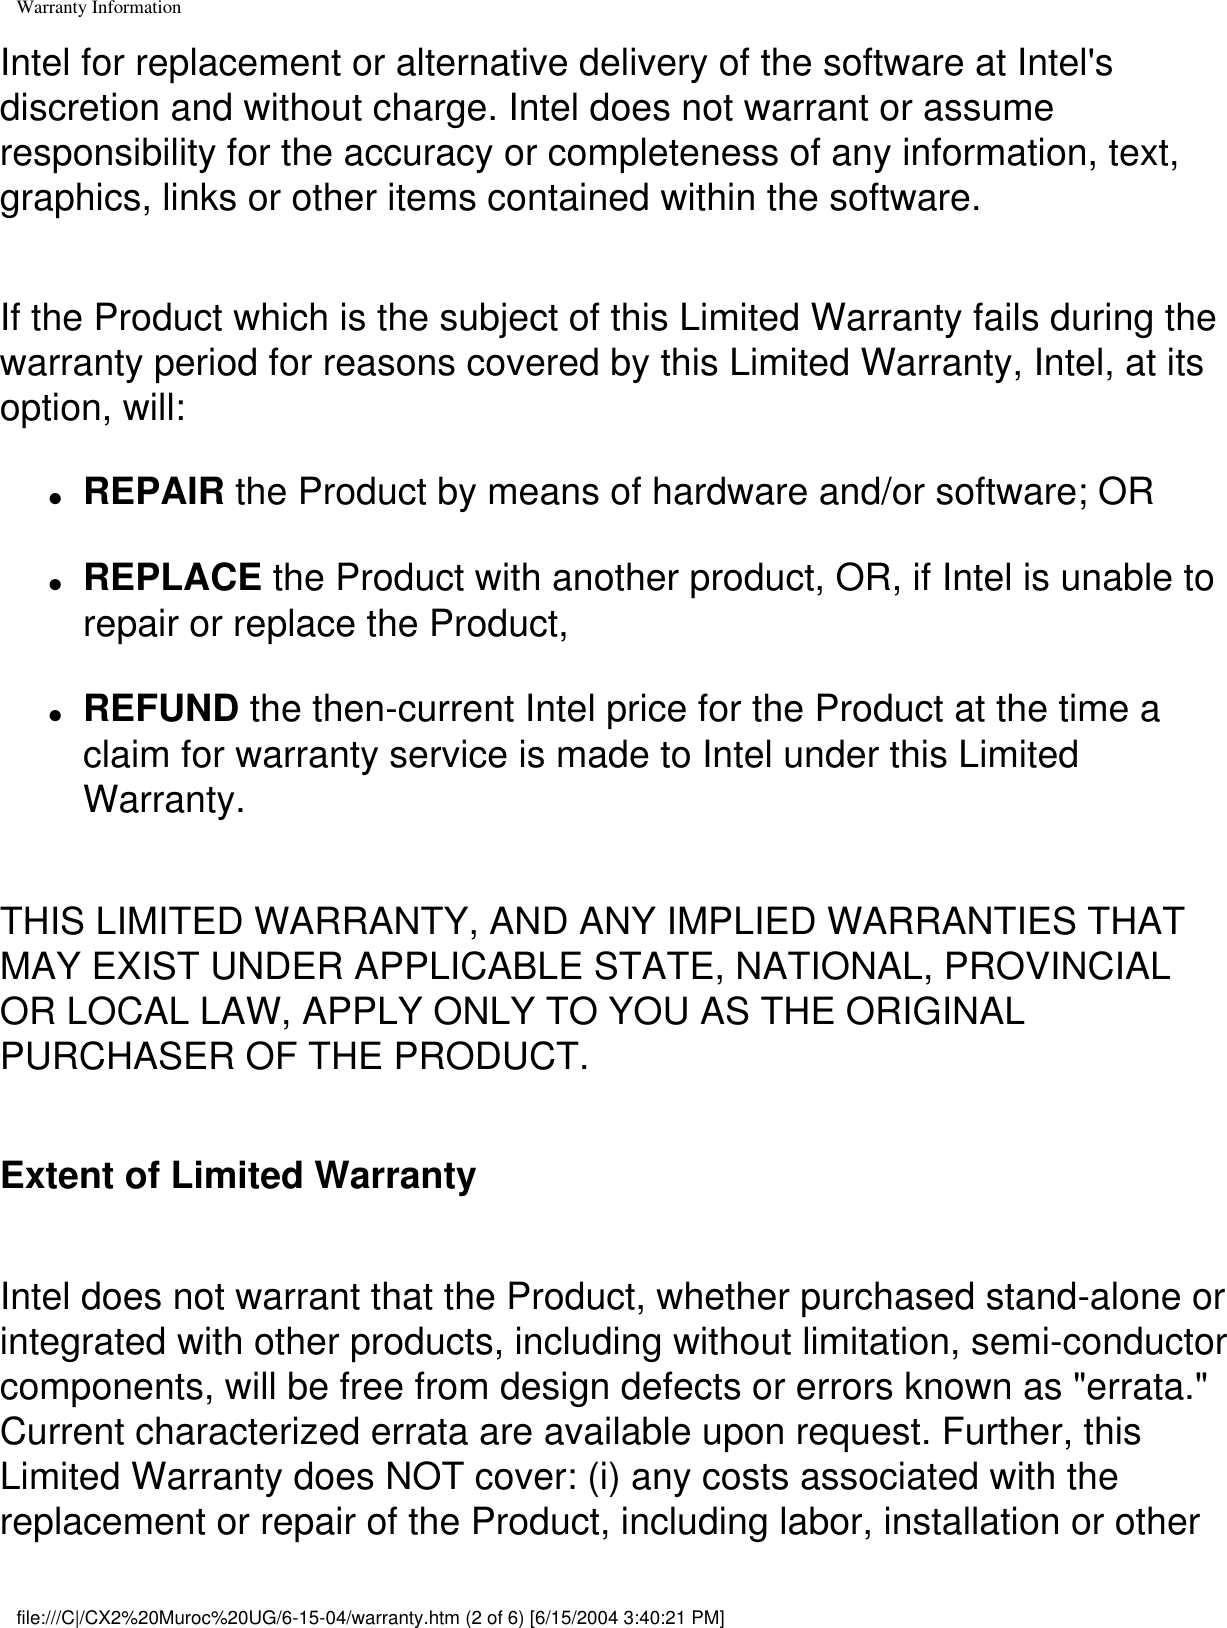 Warranty InformationIntel for replacement or alternative delivery of the software at Intel&apos;s discretion and without charge. Intel does not warrant or assume responsibility for the accuracy or completeness of any information, text, graphics, links or other items contained within the software. If the Product which is the subject of this Limited Warranty fails during the warranty period for reasons covered by this Limited Warranty, Intel, at its option, will: ●     REPAIR the Product by means of hardware and/or software; OR●     REPLACE the Product with another product, OR, if Intel is unable to repair or replace the Product,●     REFUND the then-current Intel price for the Product at the time a claim for warranty service is made to Intel under this Limited Warranty.THIS LIMITED WARRANTY, AND ANY IMPLIED WARRANTIES THAT MAY EXIST UNDER APPLICABLE STATE, NATIONAL, PROVINCIAL OR LOCAL LAW, APPLY ONLY TO YOU AS THE ORIGINAL PURCHASER OF THE PRODUCT. Extent of Limited WarrantyIntel does not warrant that the Product, whether purchased stand-alone or integrated with other products, including without limitation, semi-conductor components, will be free from design defects or errors known as &quot;errata.&quot; Current characterized errata are available upon request. Further, this Limited Warranty does NOT cover: (i) any costs associated with the replacement or repair of the Product, including labor, installation or other file:///C|/CX2%20Muroc%20UG/6-15-04/warranty.htm (2 of 6) [6/15/2004 3:40:21 PM]